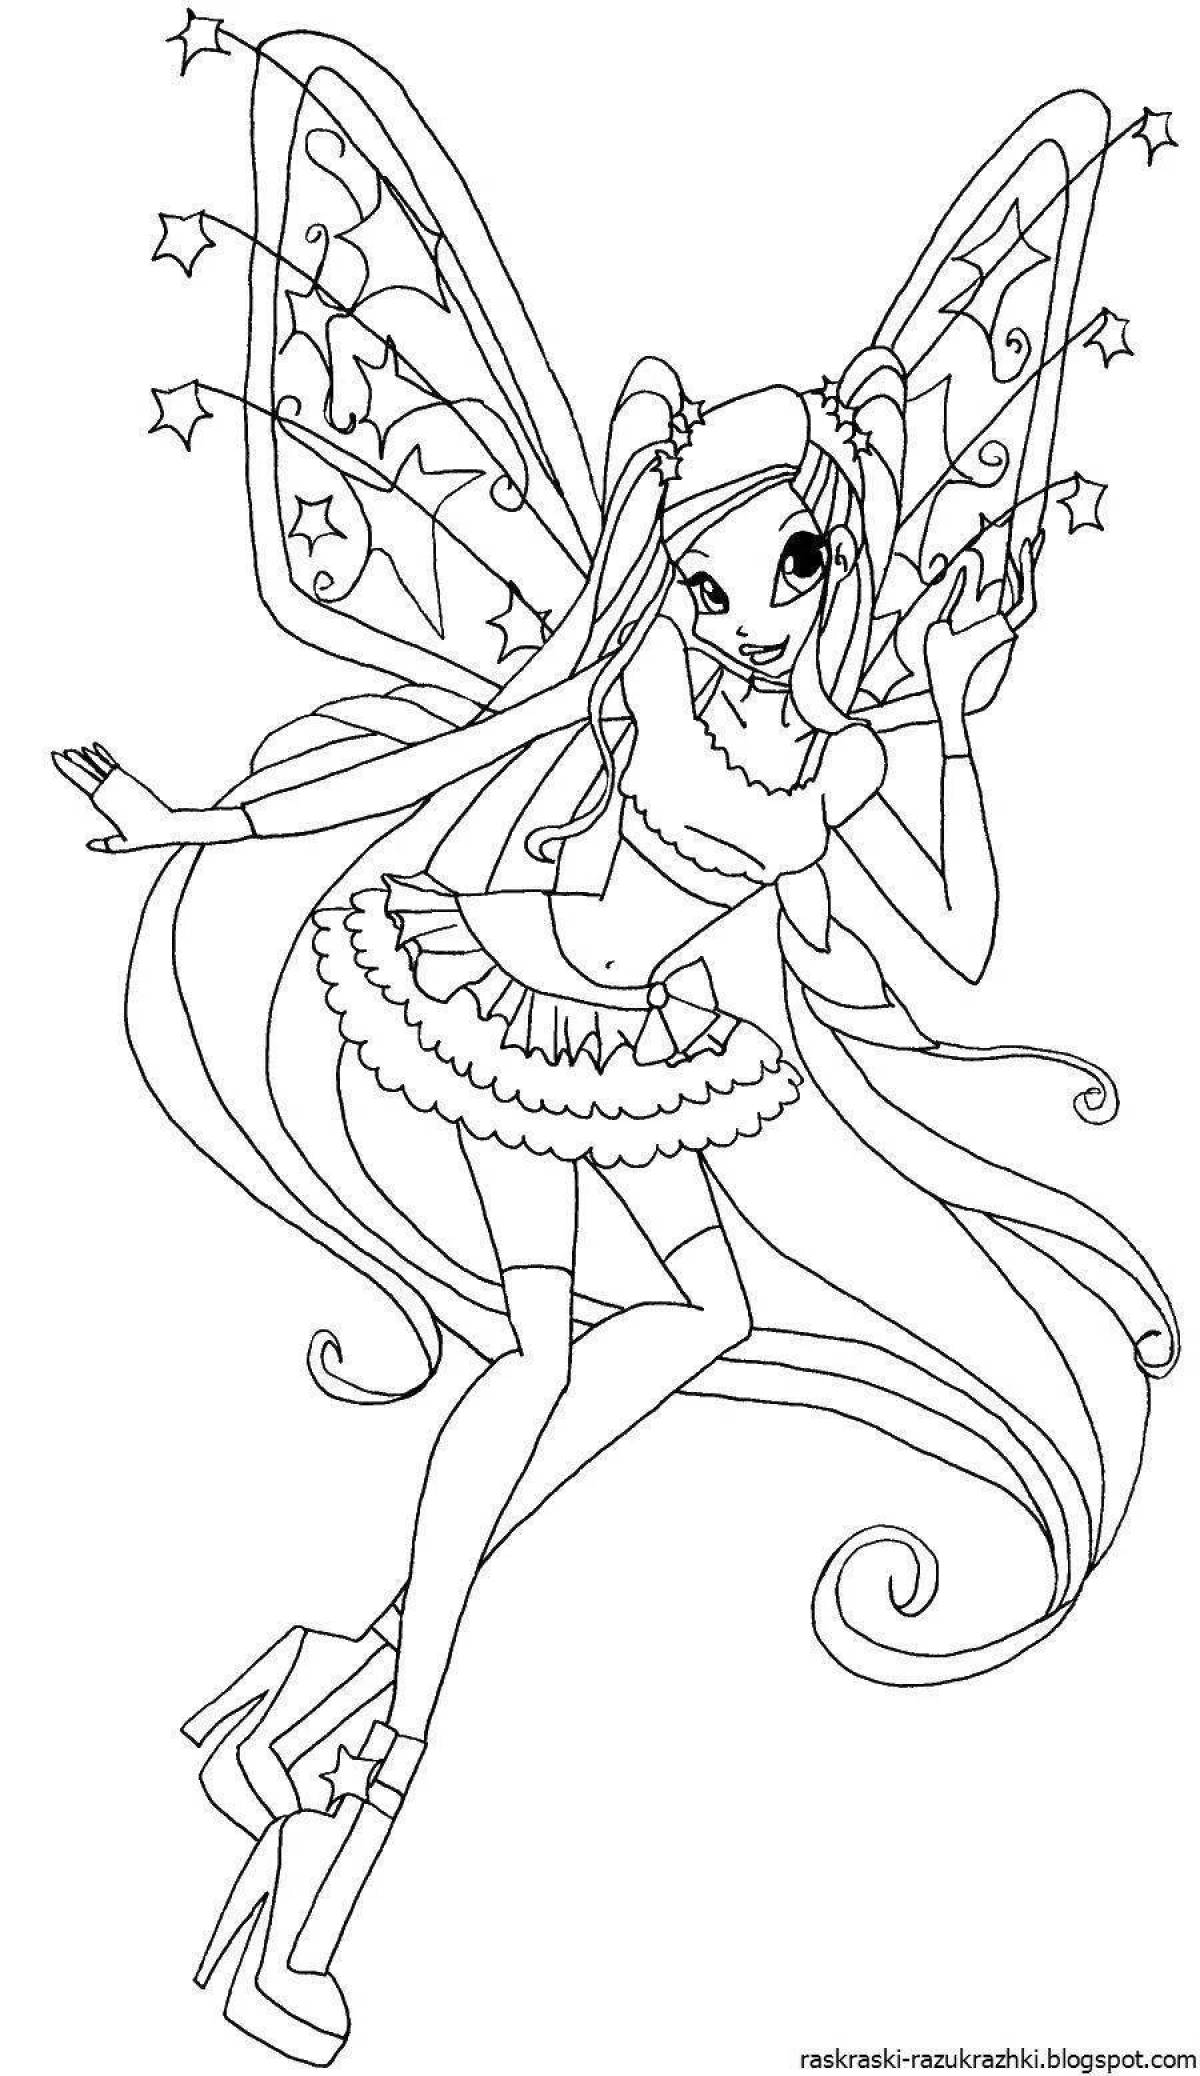 Colorful Winx coloring pages